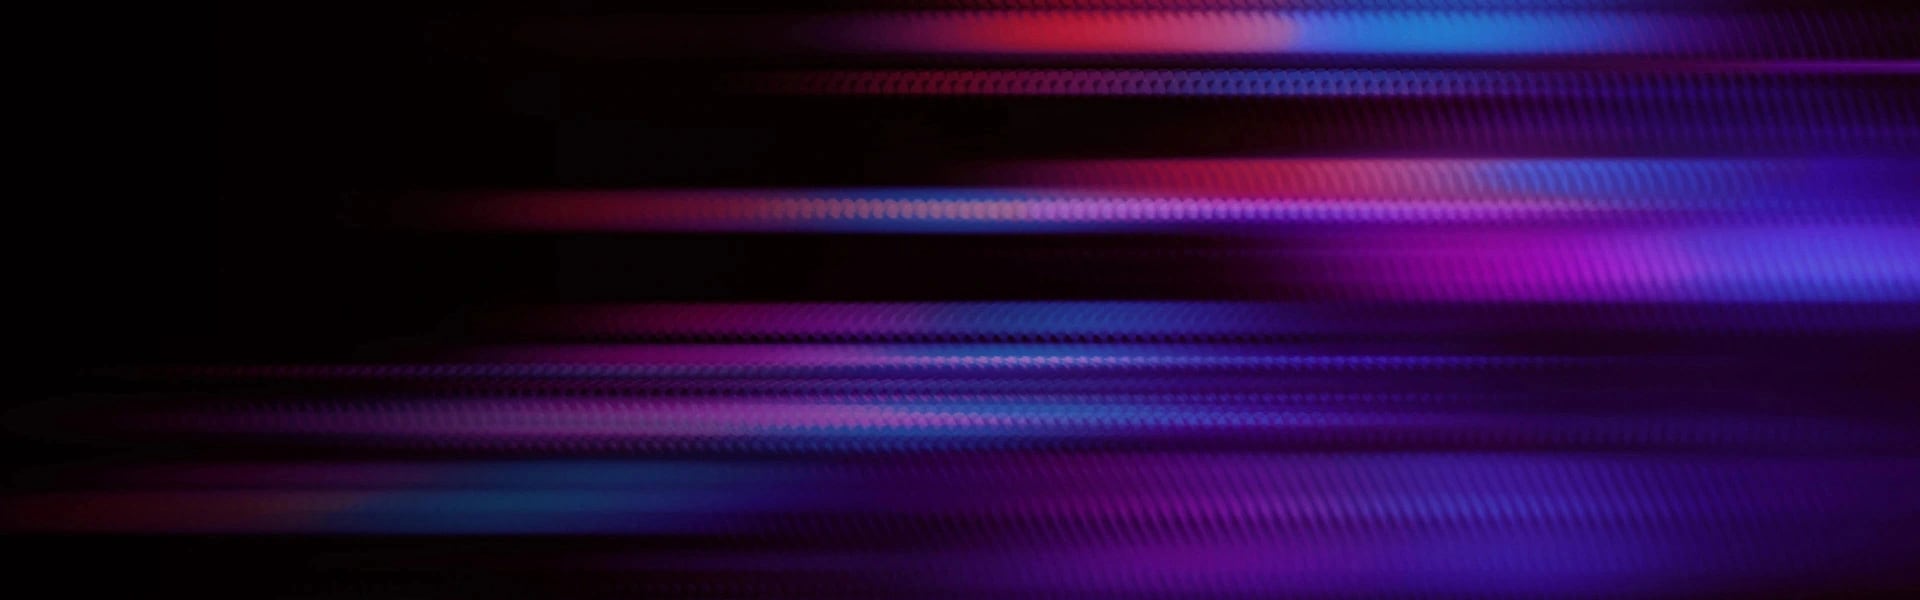 Abstract streaks of various colors